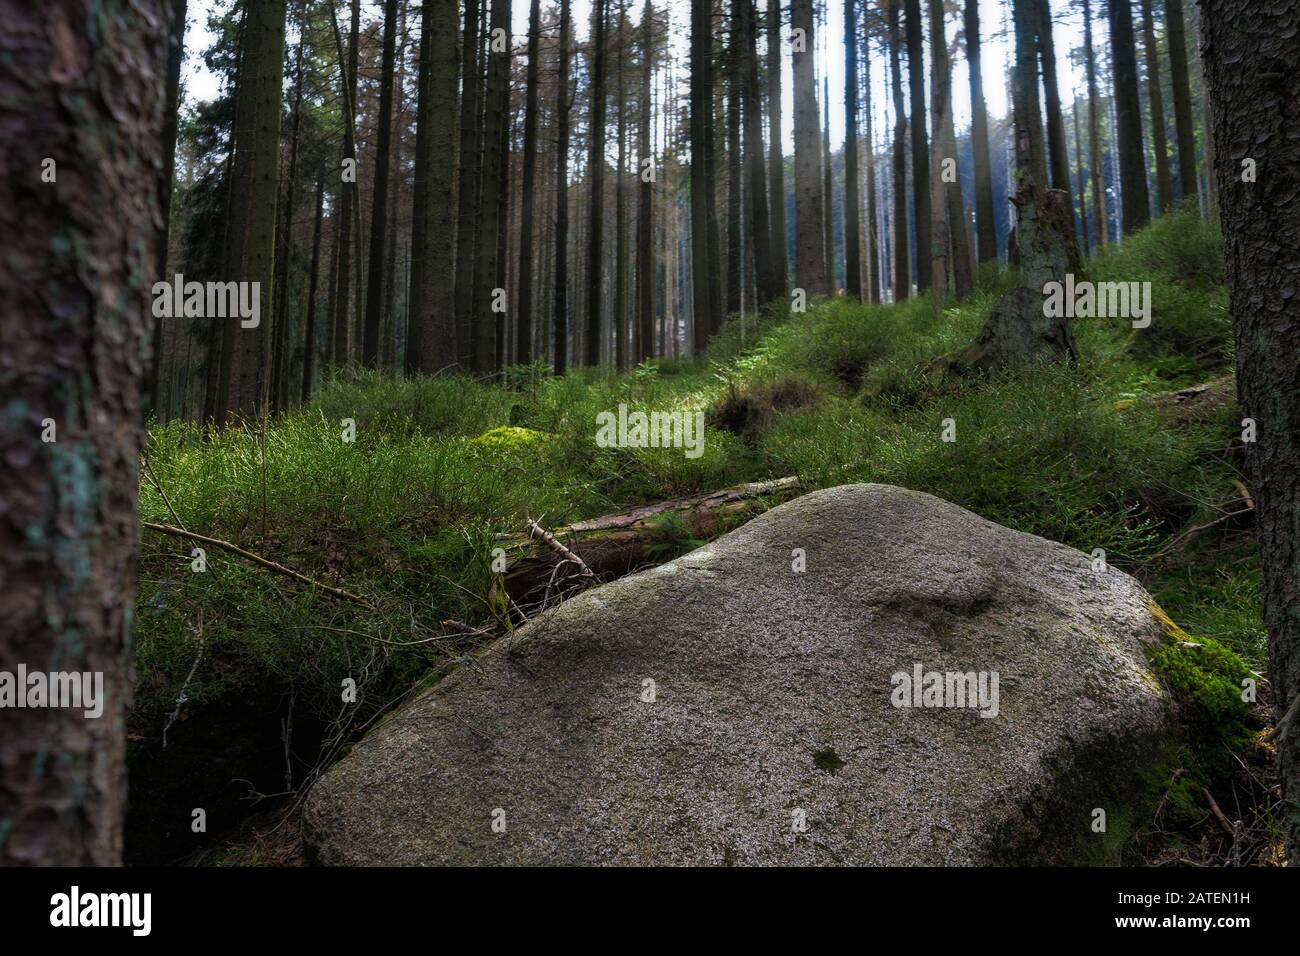 Forest at the Harz National Park Stock Photo